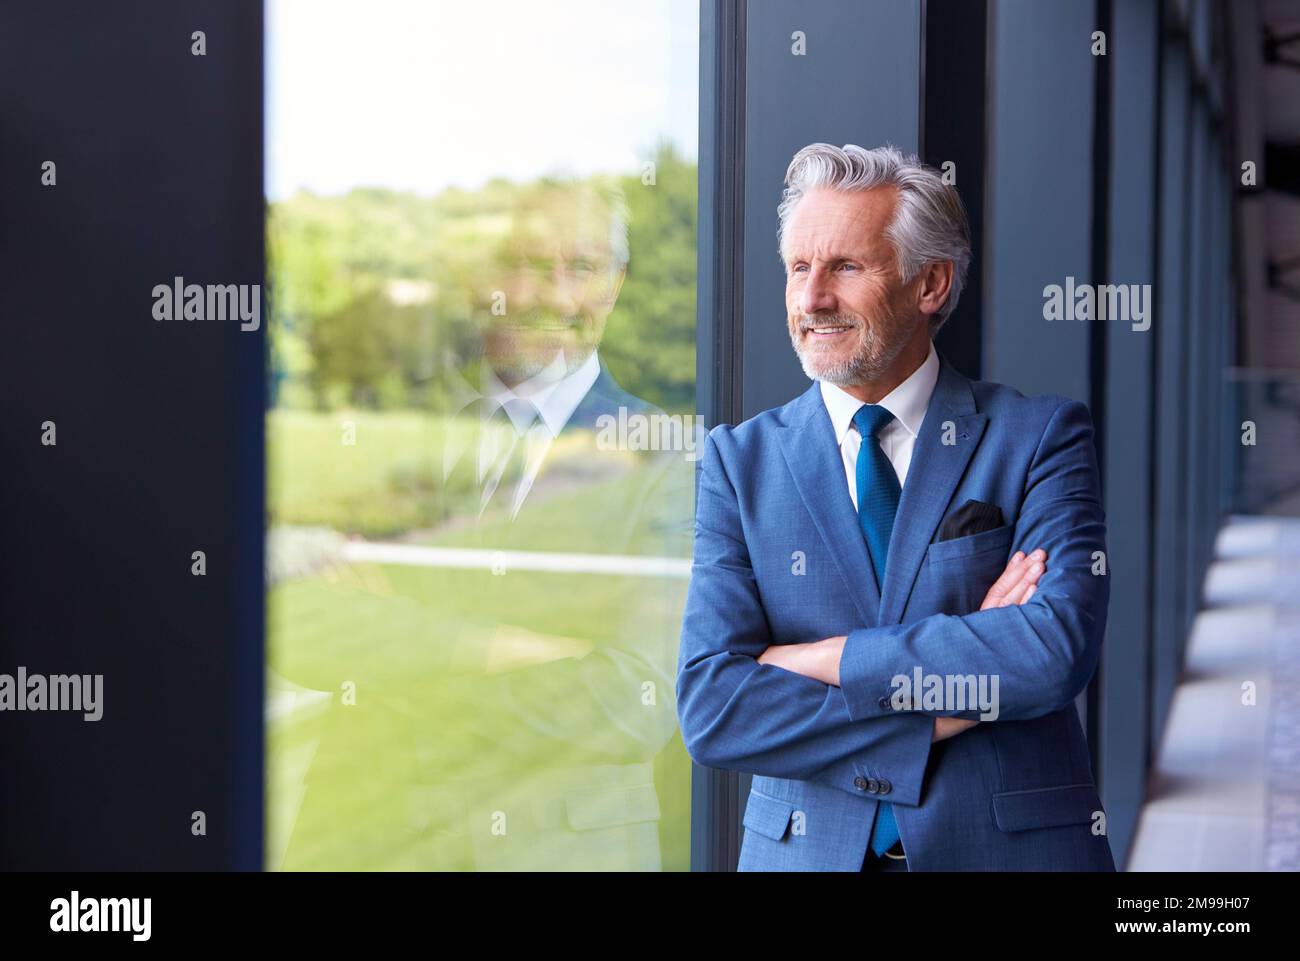 Portrait Of Smiling Senior Businessman CEO Chairman Standing By Window Inside Modern Office Building Stock Photo